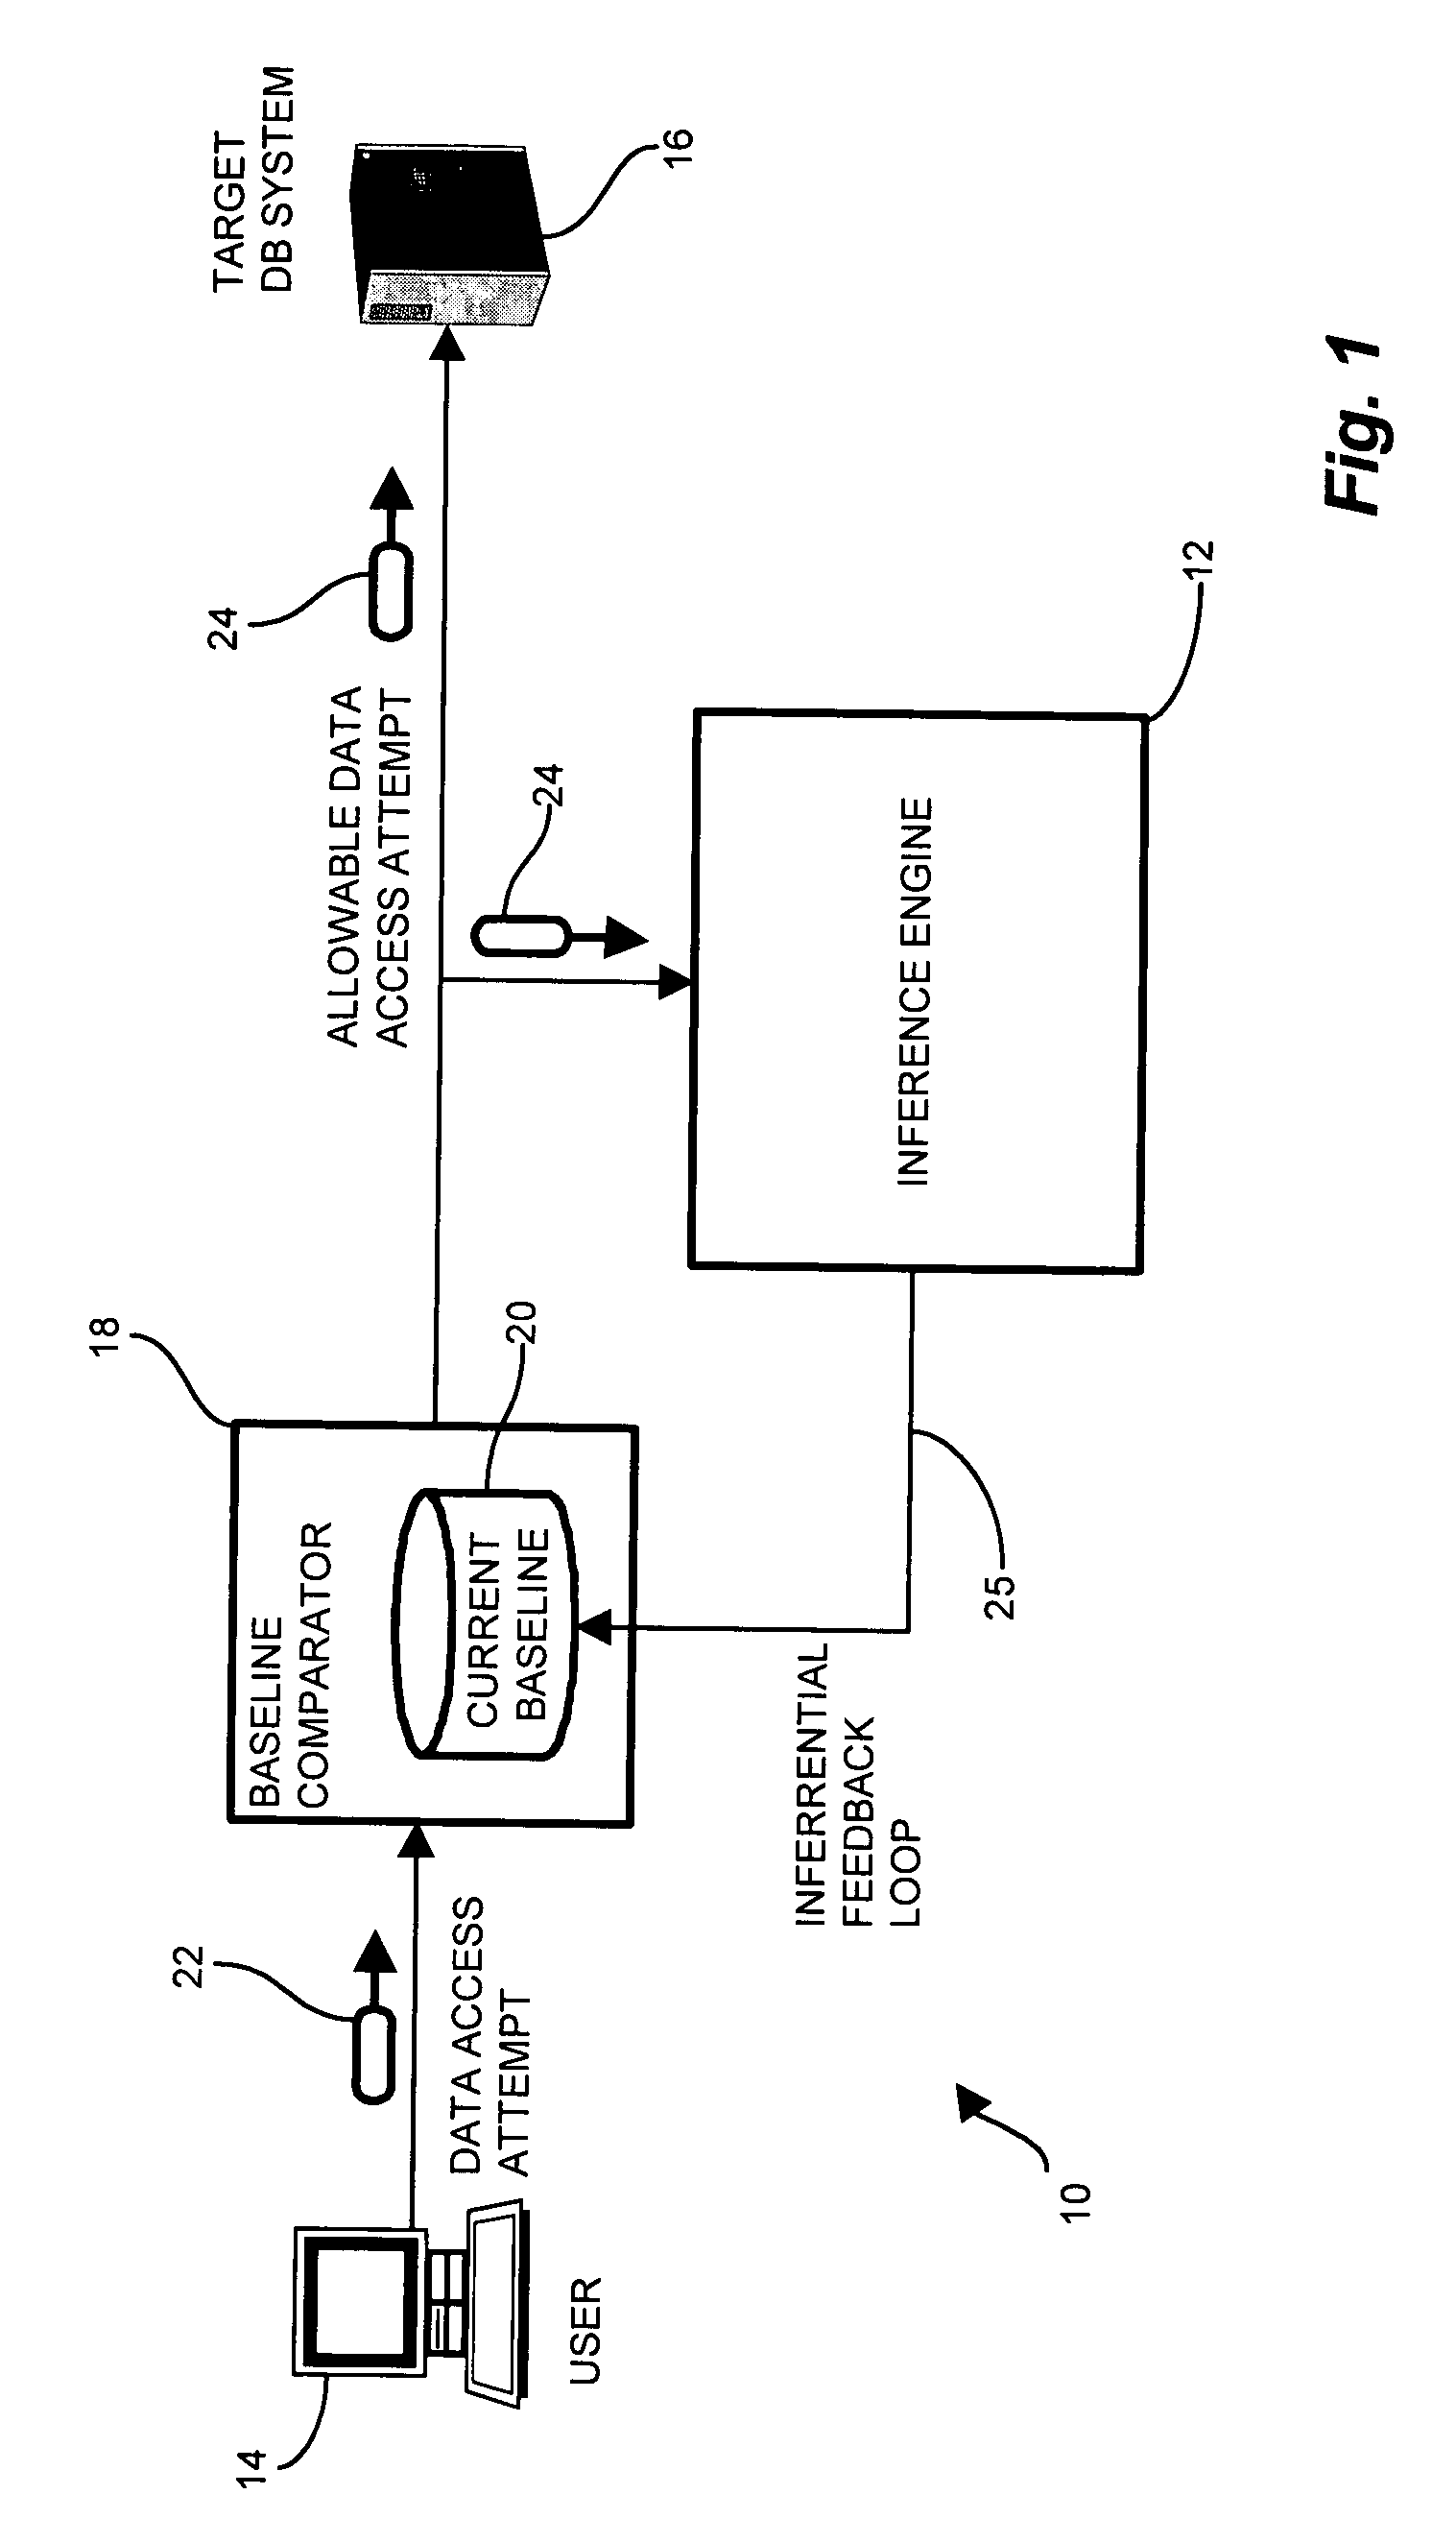 System and methods for adaptive behavior based access control